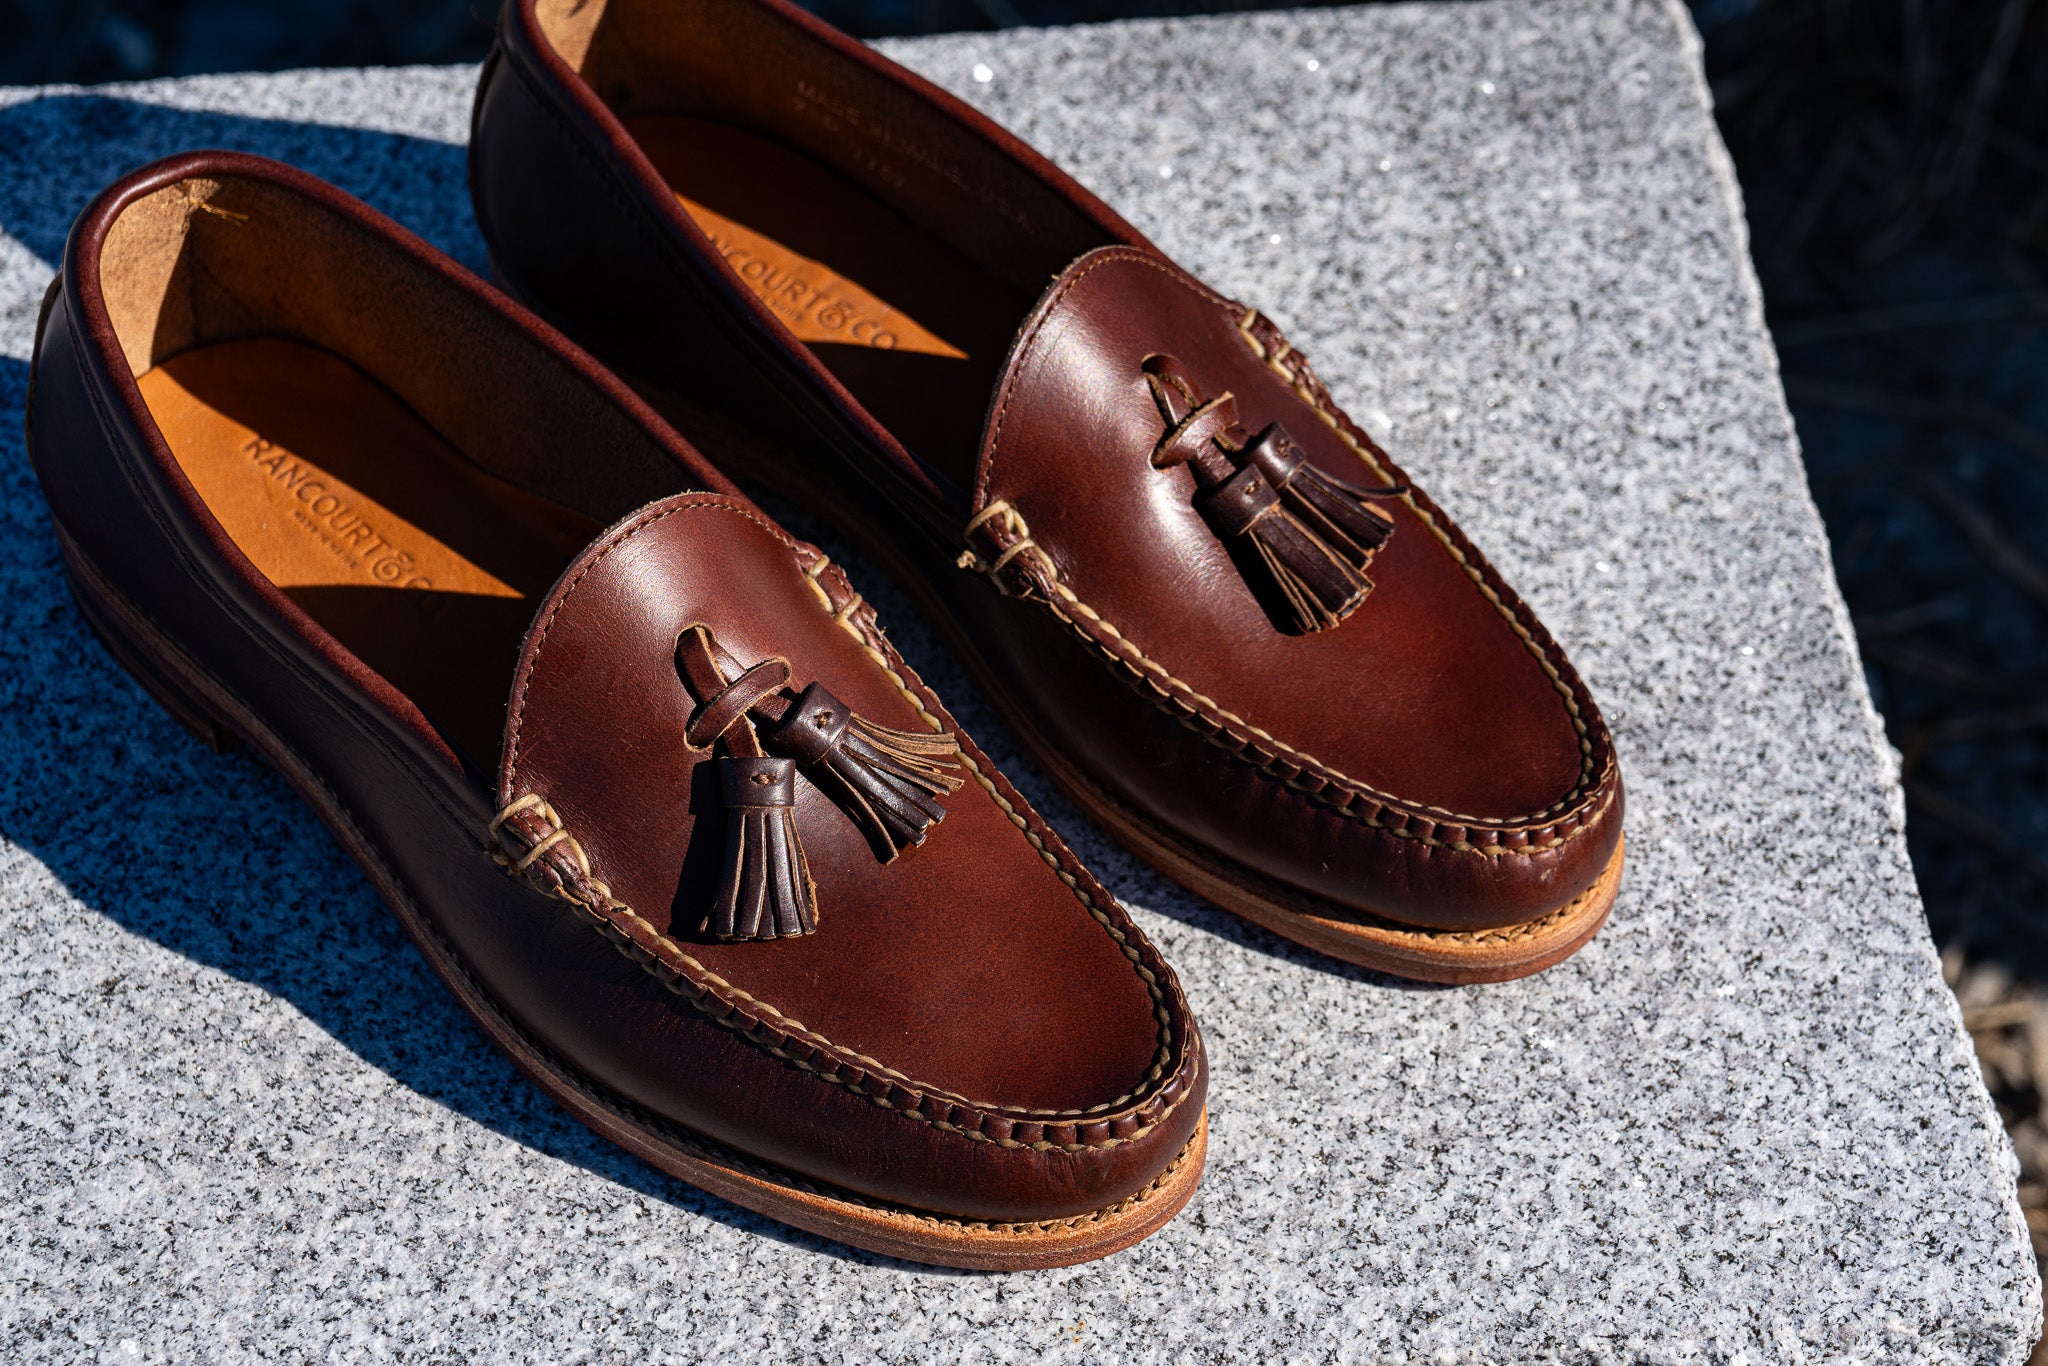 Rancourt & Co. | Handcrafted & Custom Shoes | Made in Maine